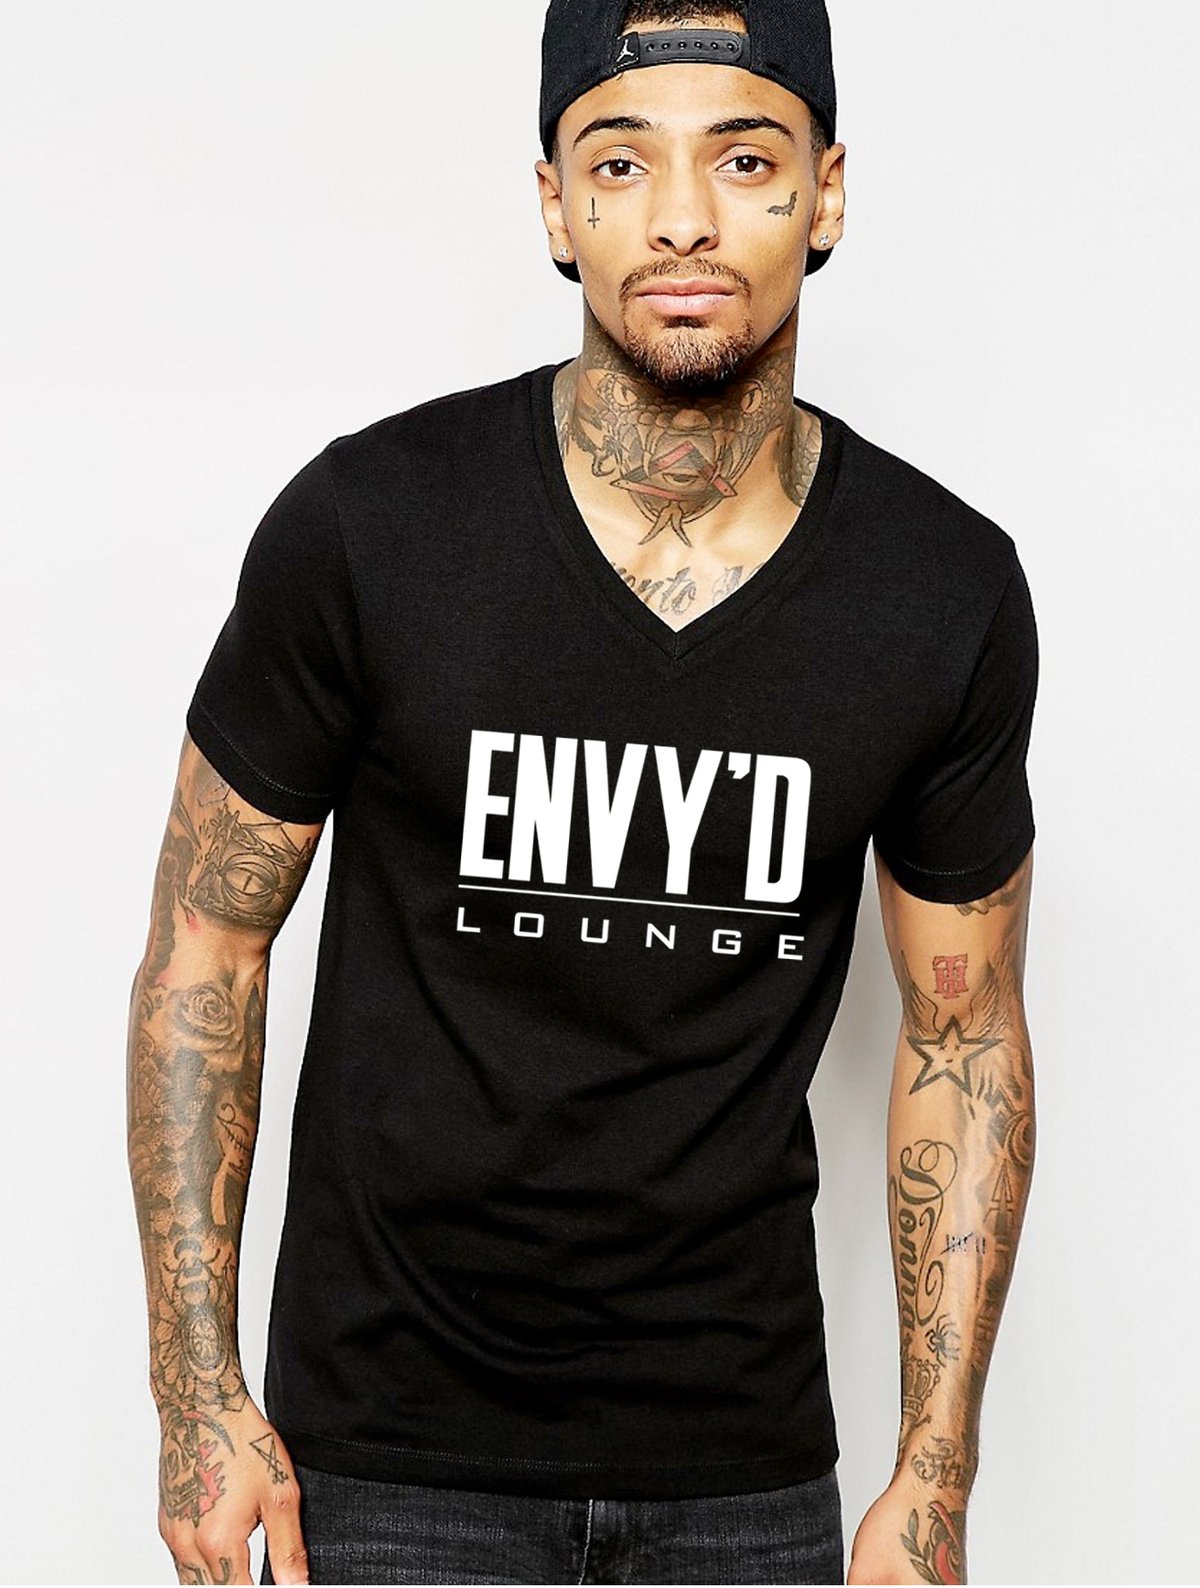 Image of Envy'd Lounge Shirts/Tanks Male & Female